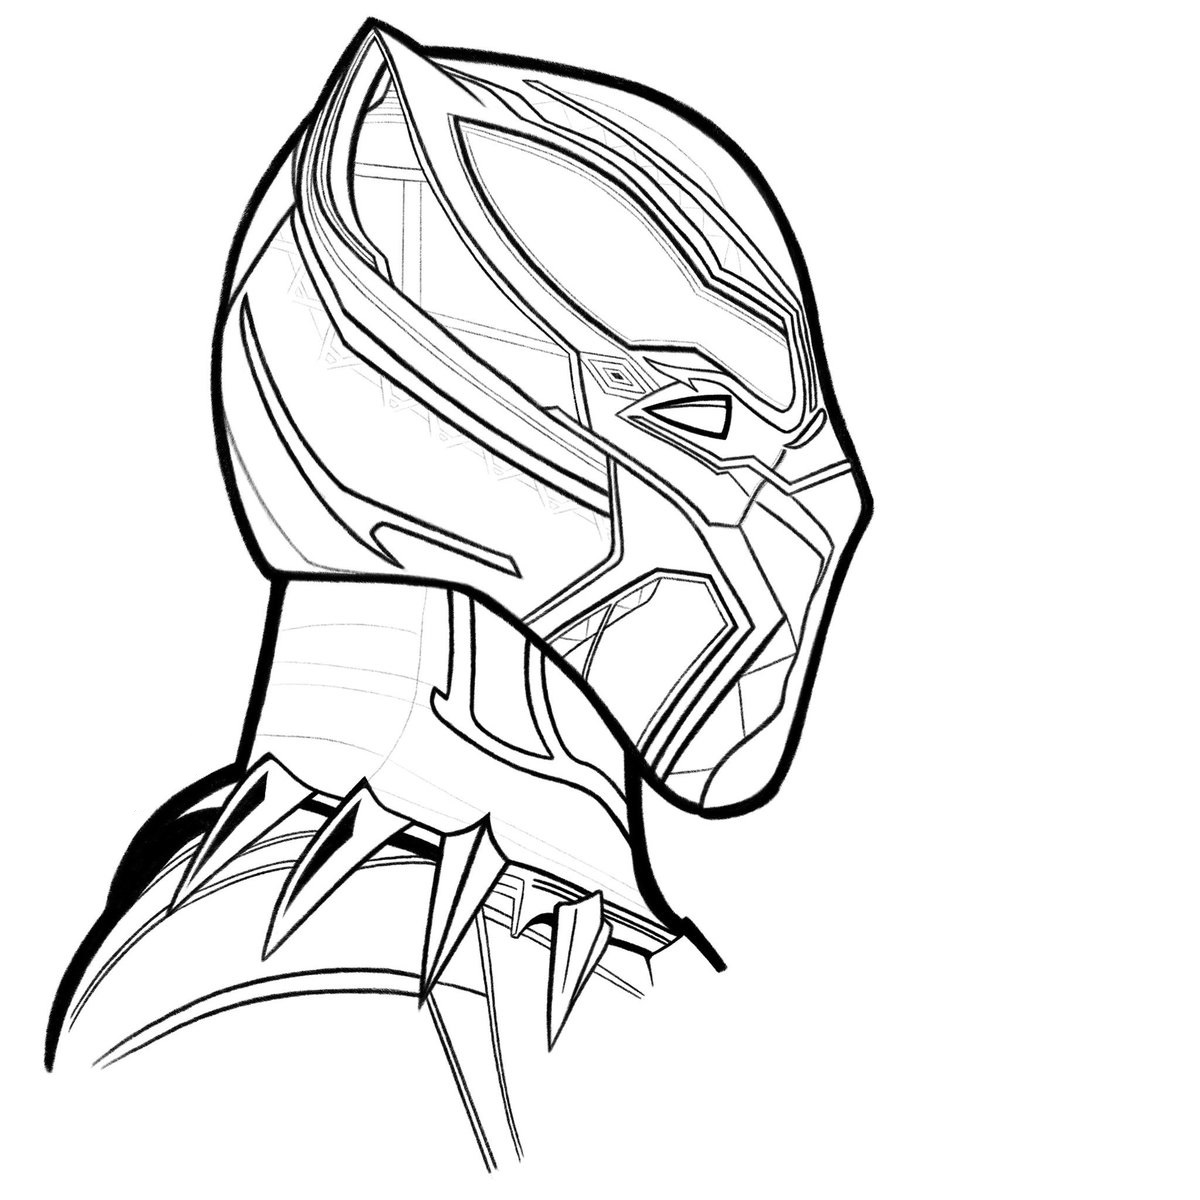 Black Panther's Awesome Mask Coloring Page - Free Printable Coloring